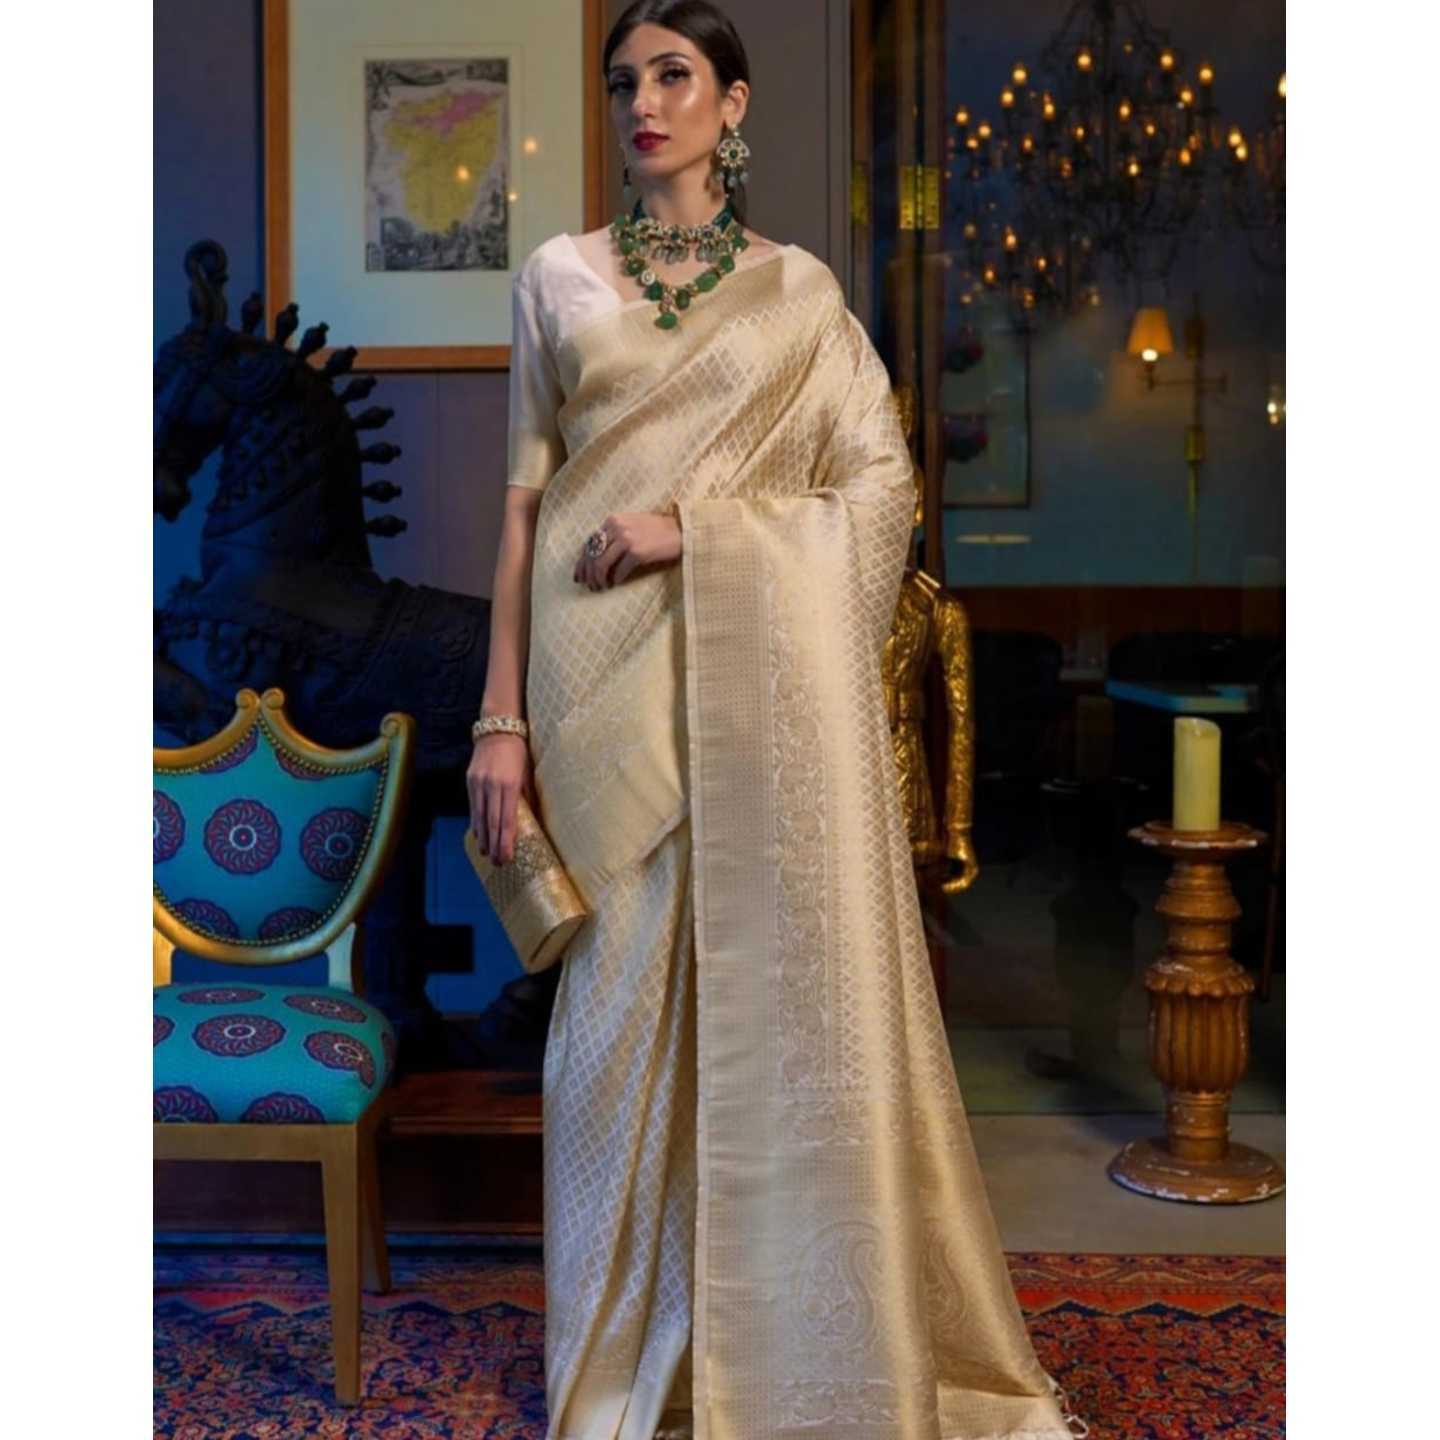 Presenting Enchanting Yet Breathable Organic Banarasi Sarees For Intimate And Big Fat Indian Weddings, That Are Light On Your Skin And Uplift Your Wedding Shenanigans.